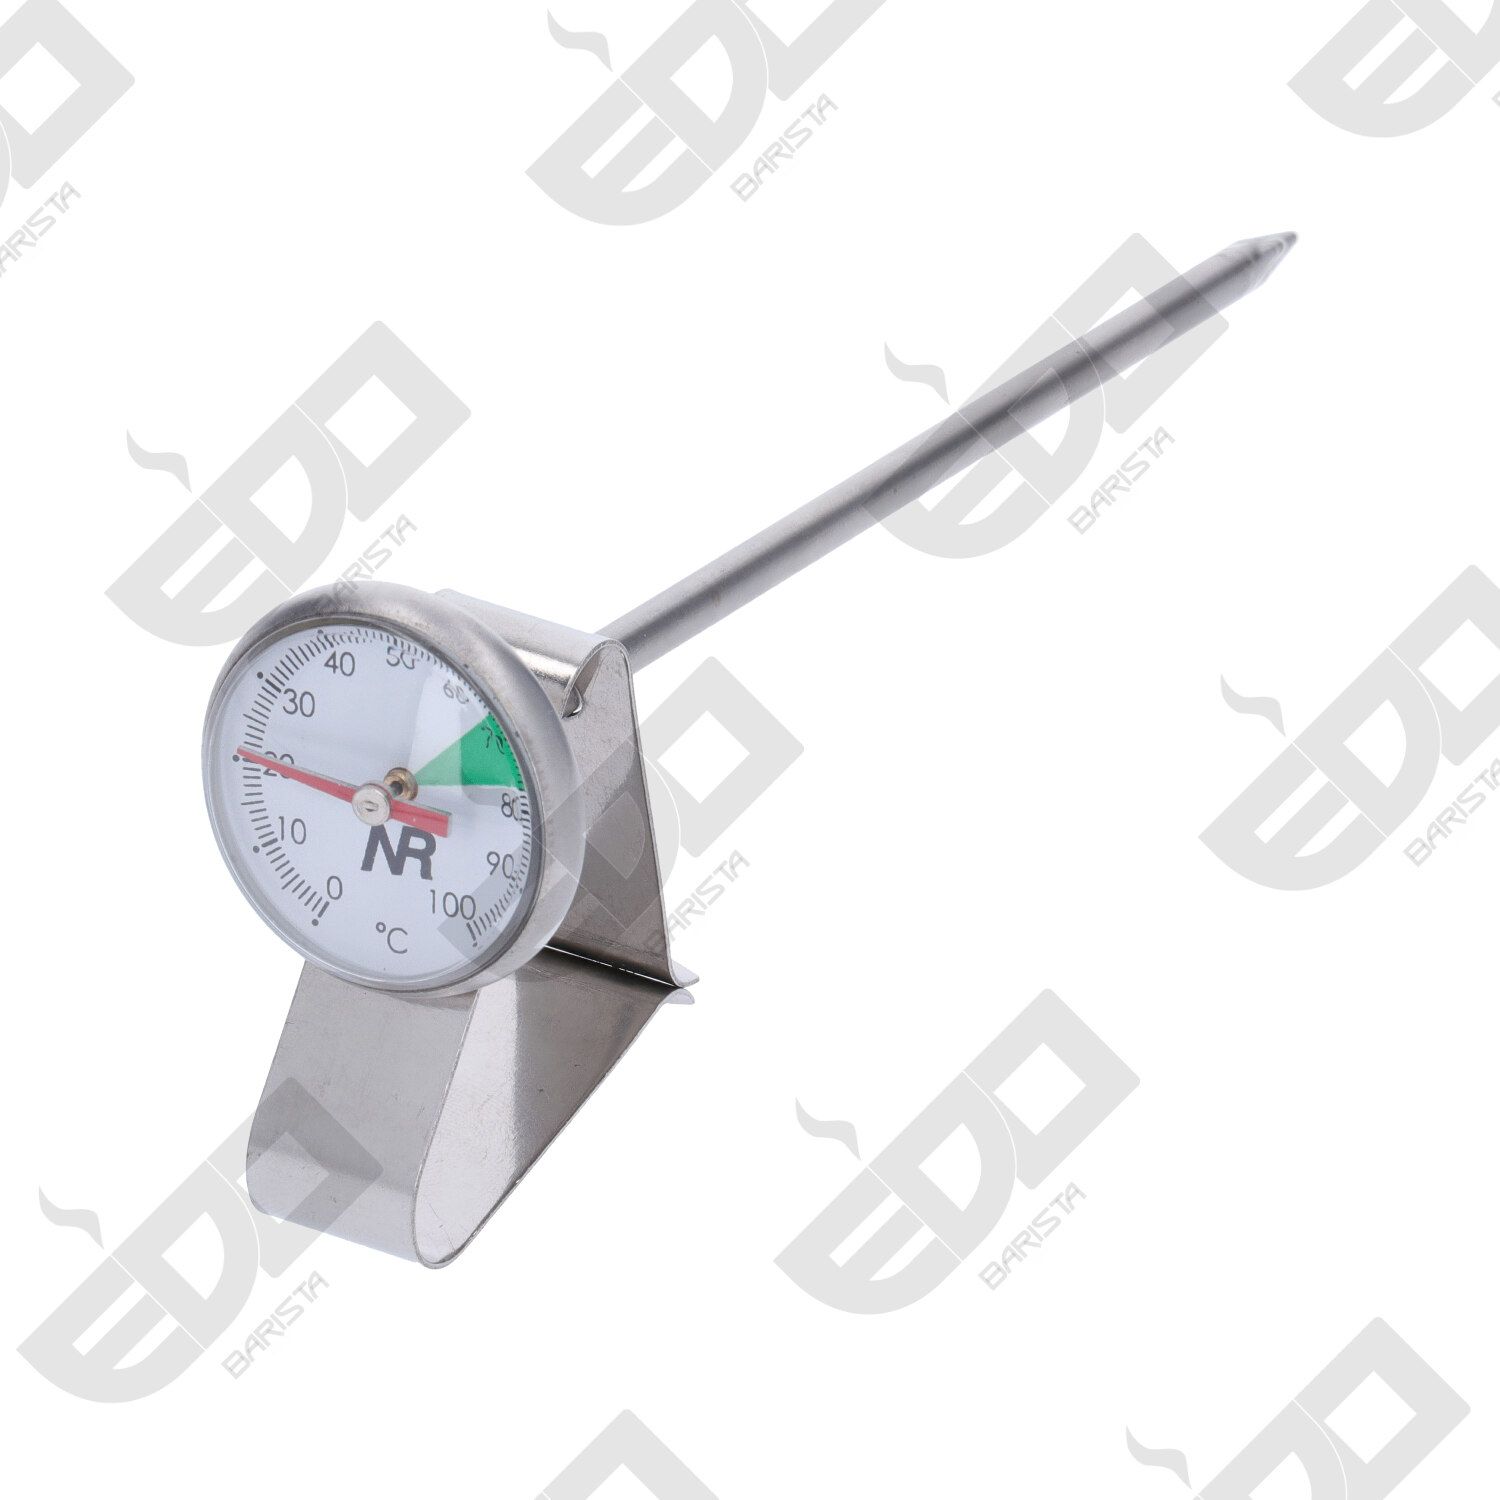 ANALOGICAL MILK PITCHER THERMOMETER